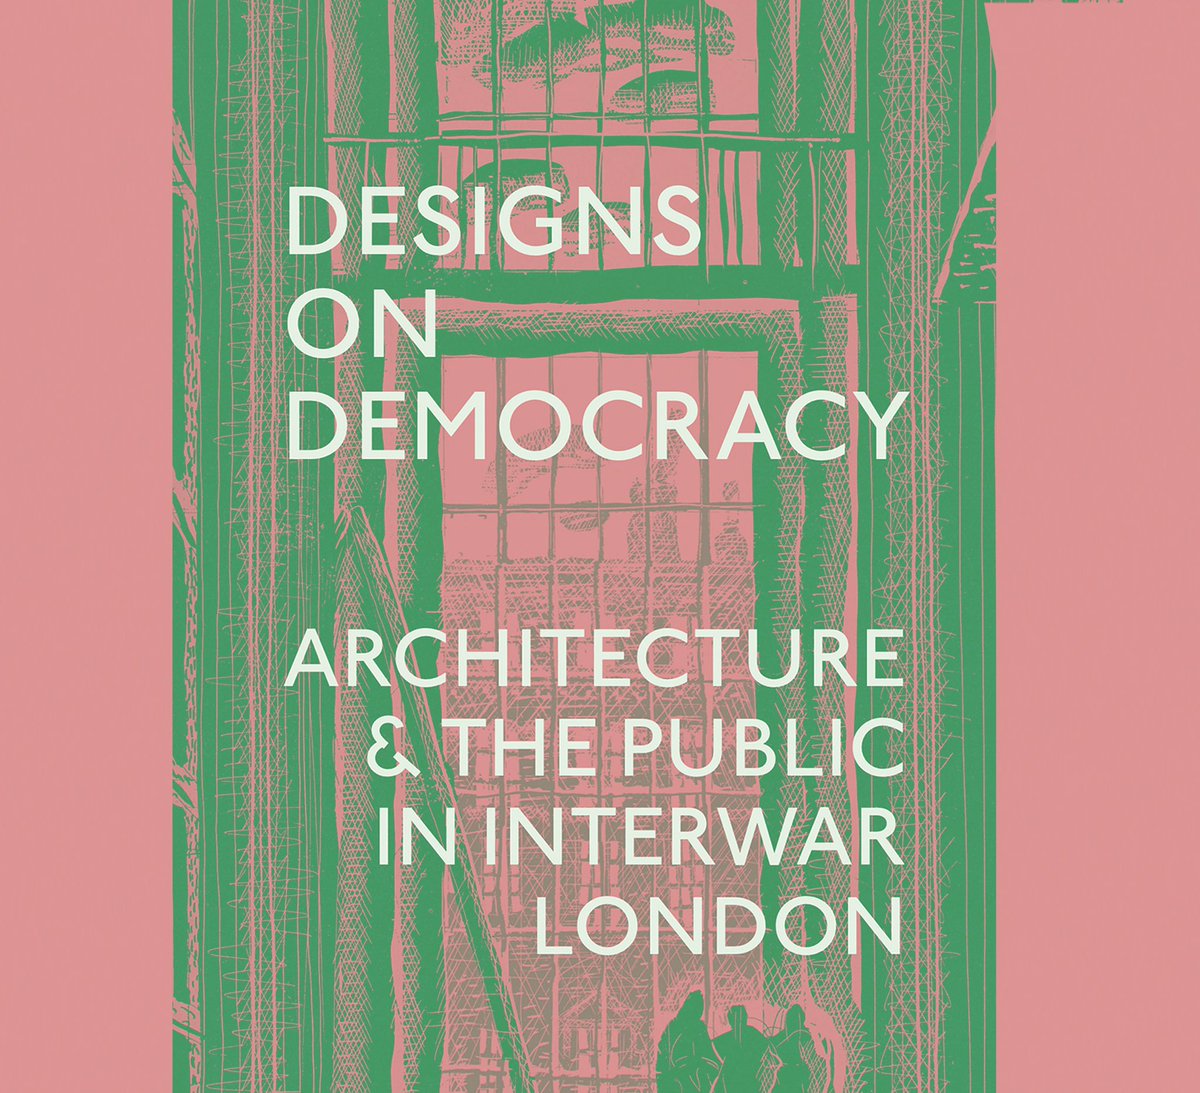 @hughpearman @n_shasore Full house for @n_shasore lecture tonight! Exploring designs on democracy, from the British Empire Exhibition at Wembley to Waterloo Bridge.